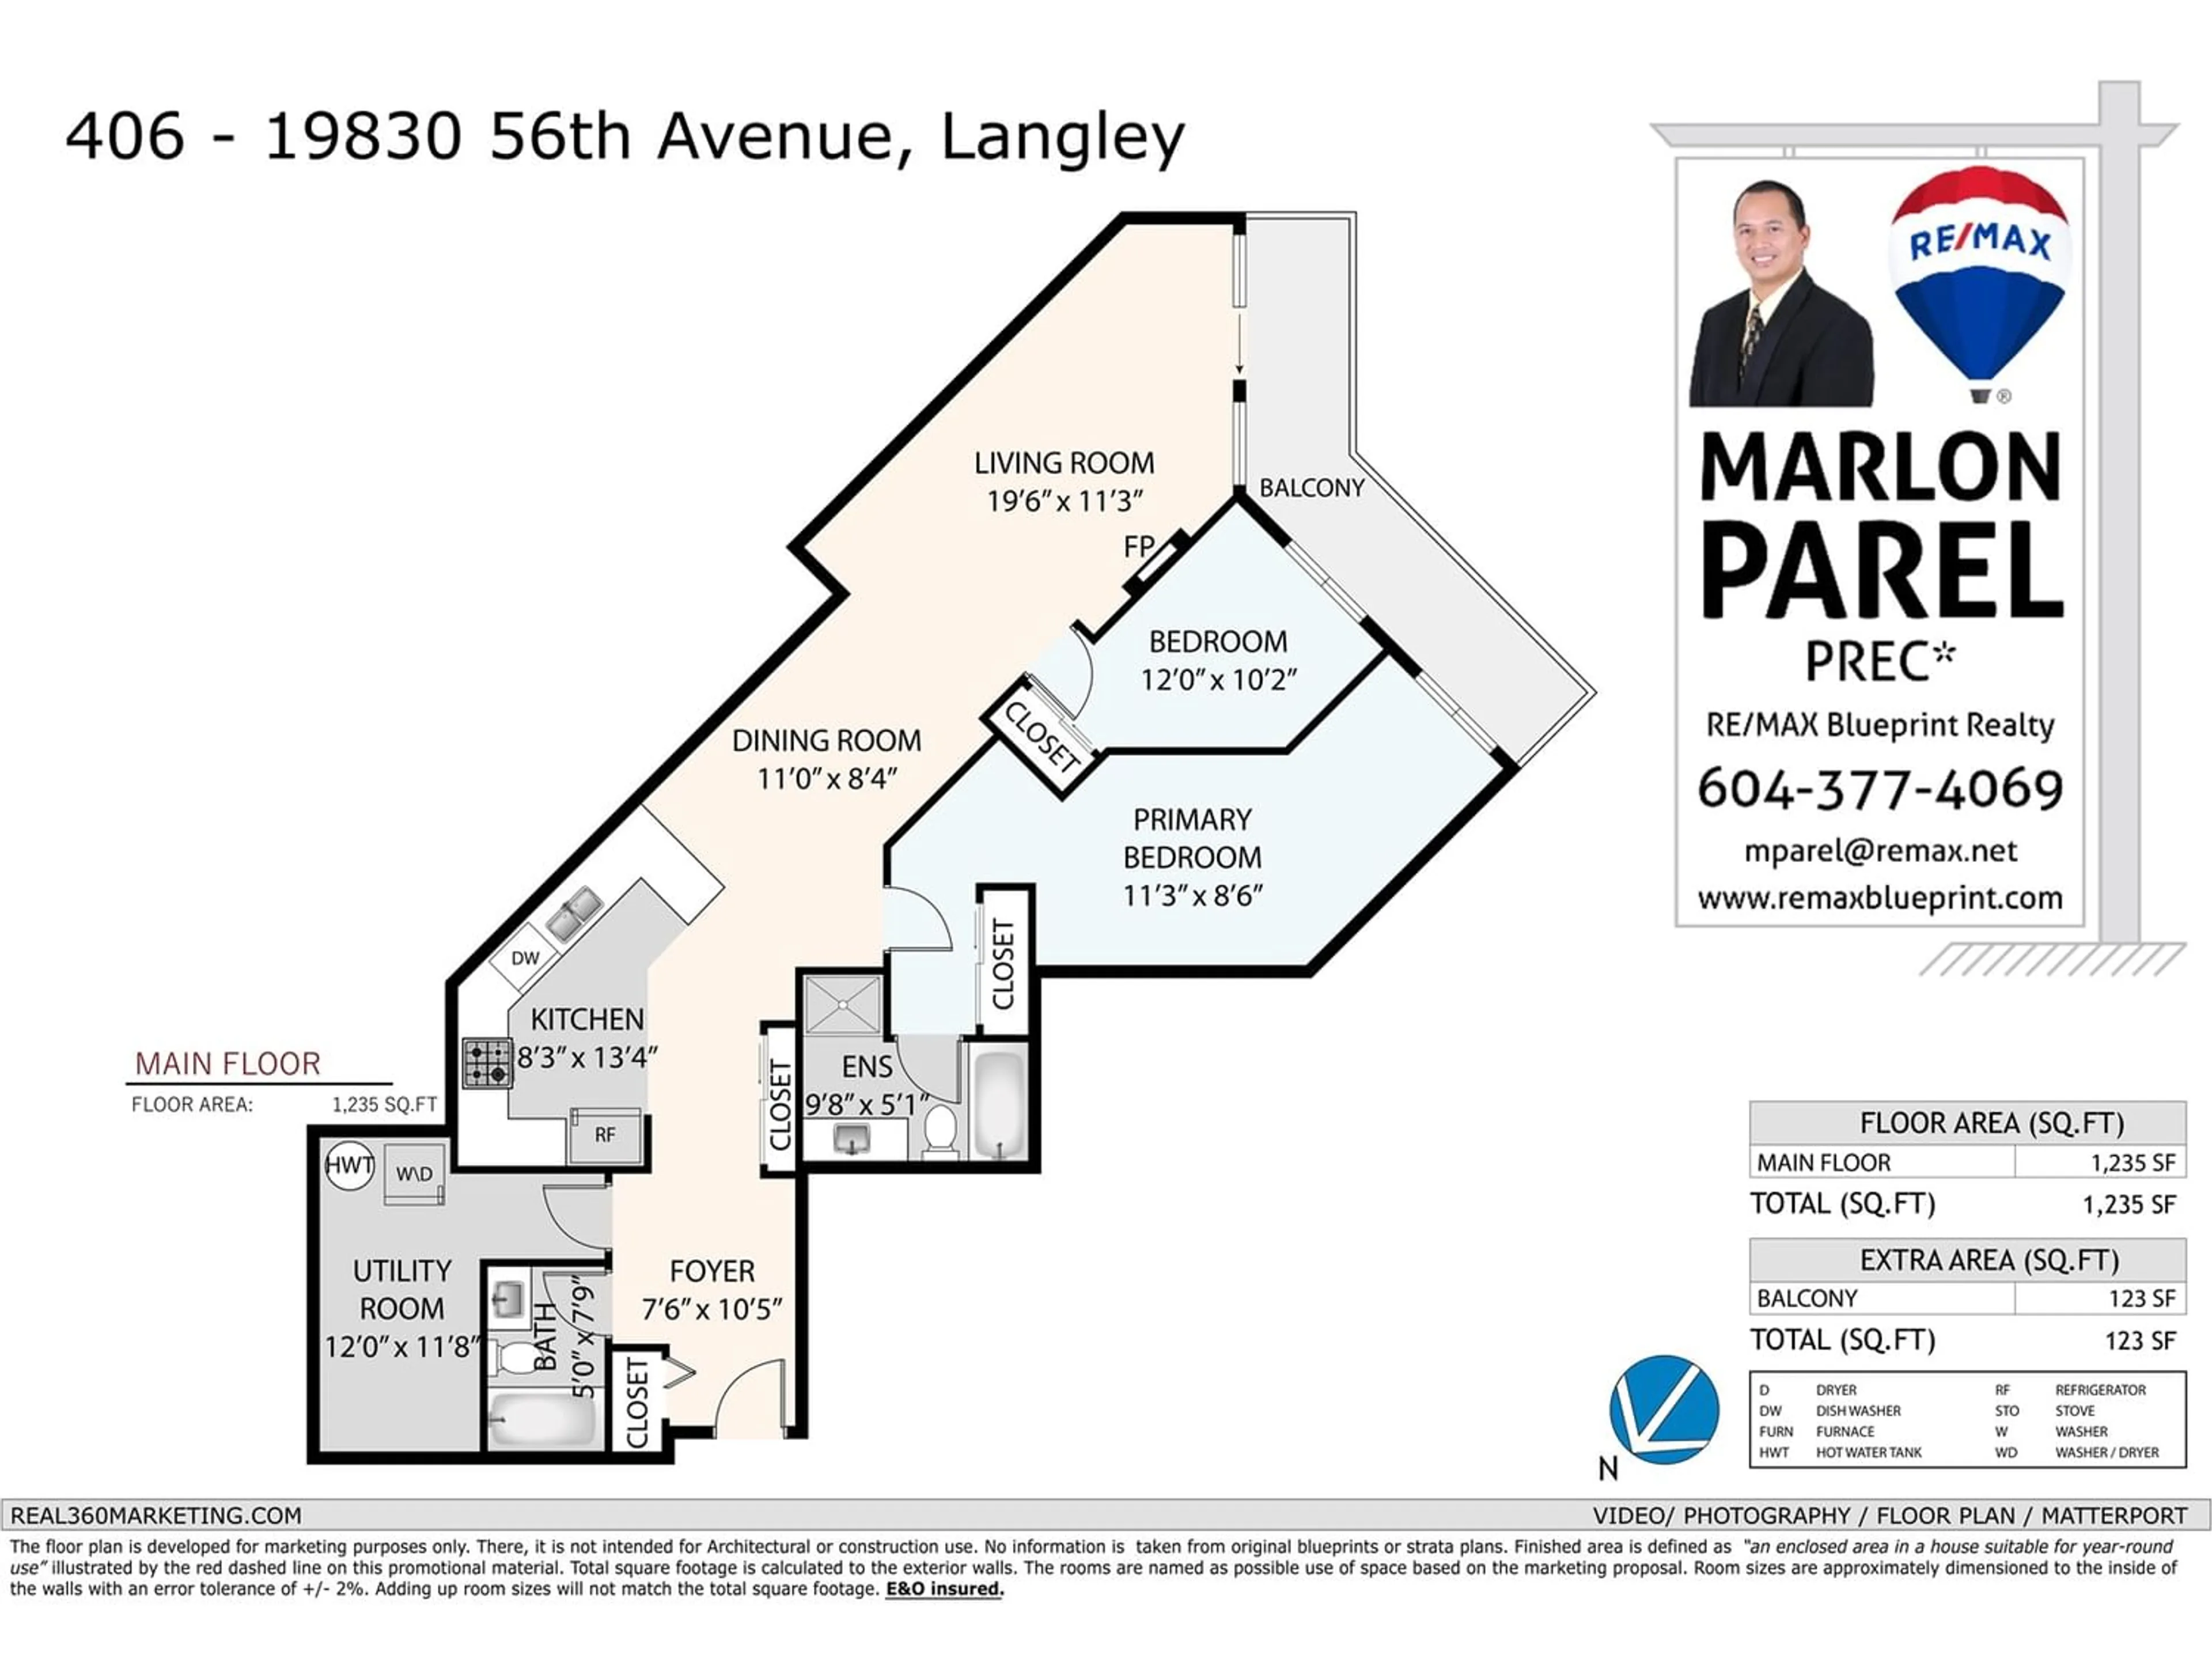 Floor plan for 406 19830 56 AVENUE, Langley British Columbia V3A0A5